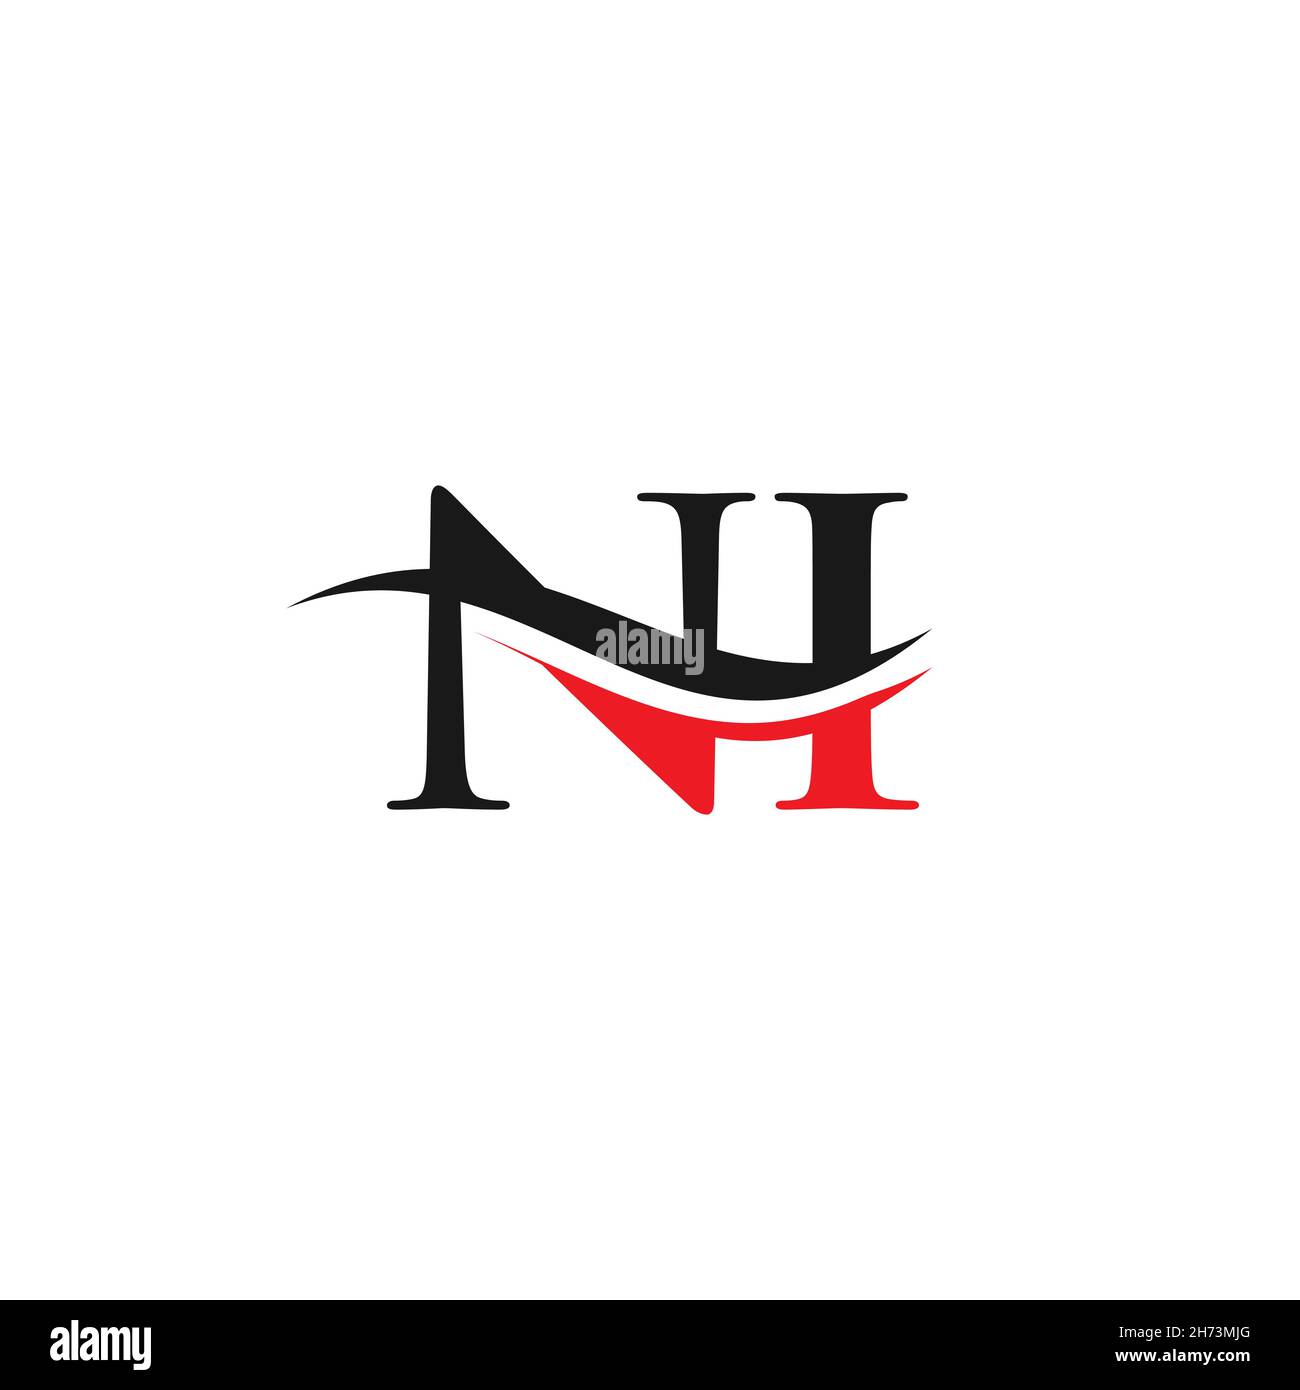 Ni logo Cut Out Stock Images & Pictures - Alamy